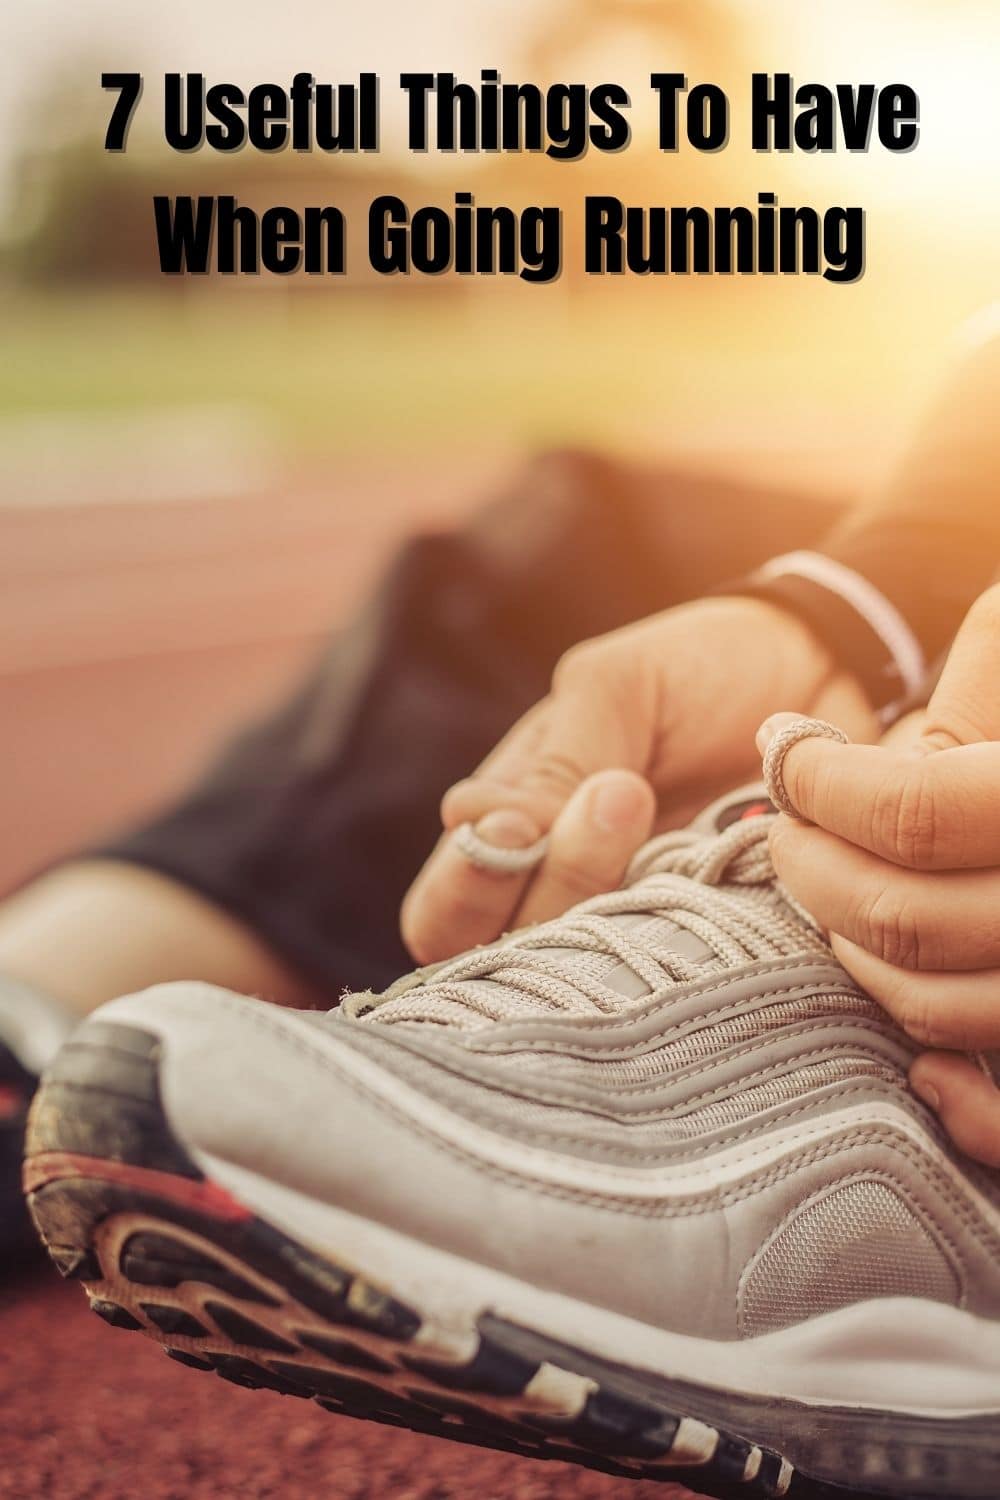 7 Useful Things To Have When Going Running